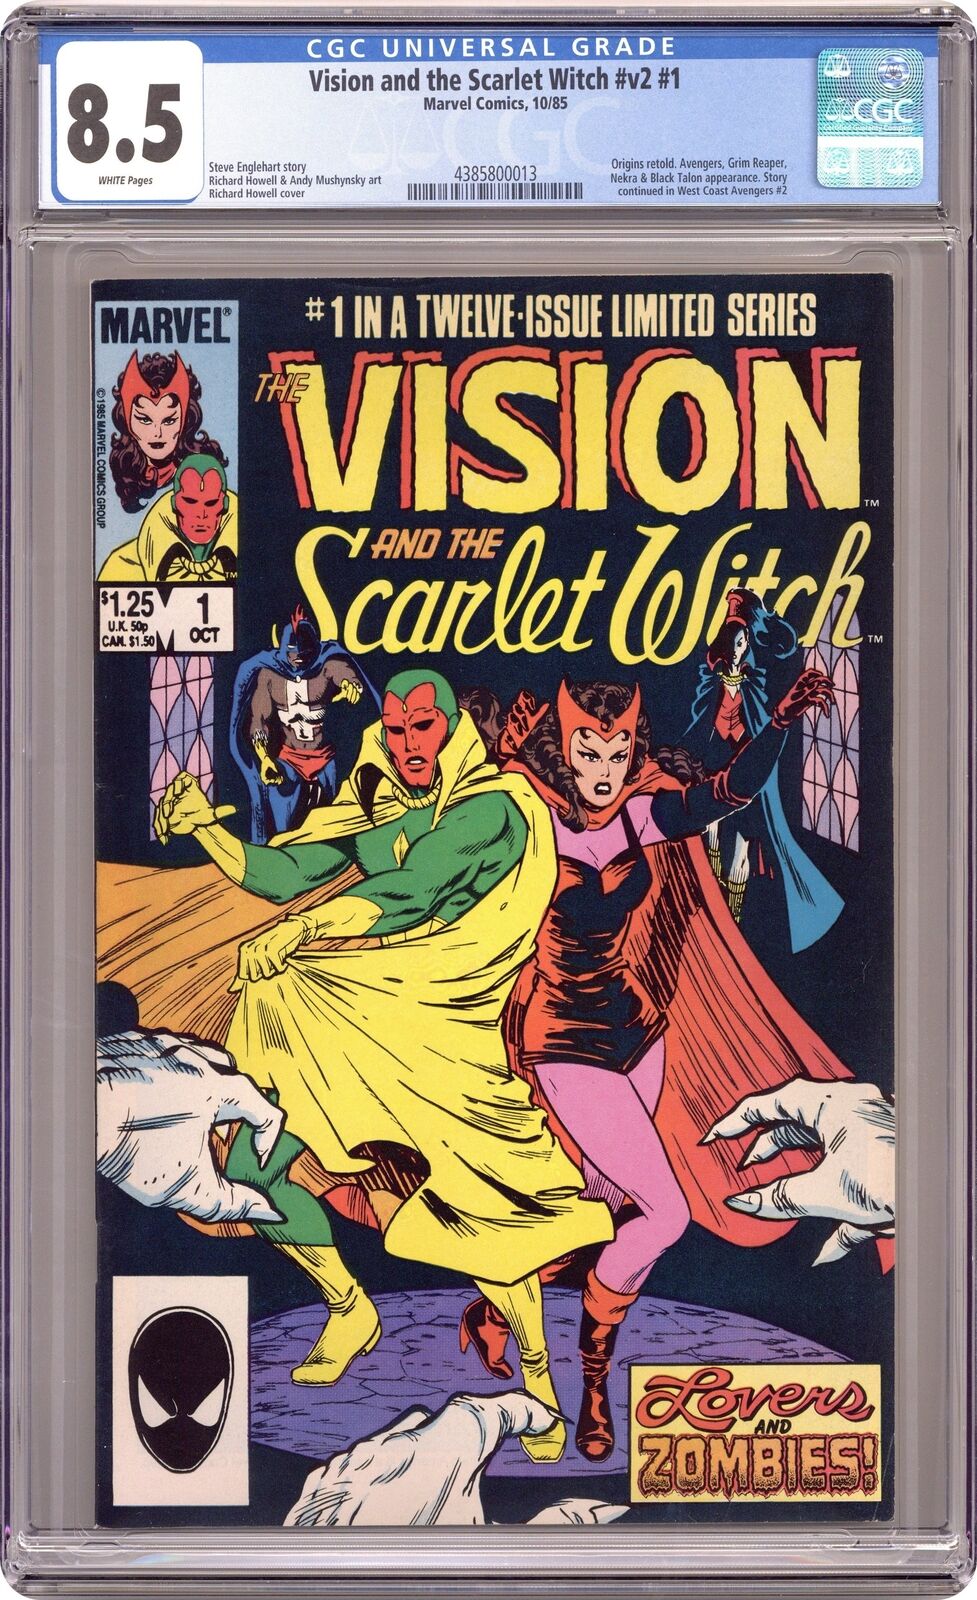 Vision and the Scarlet Witch #1 CGC 8.5 1985 4385800013